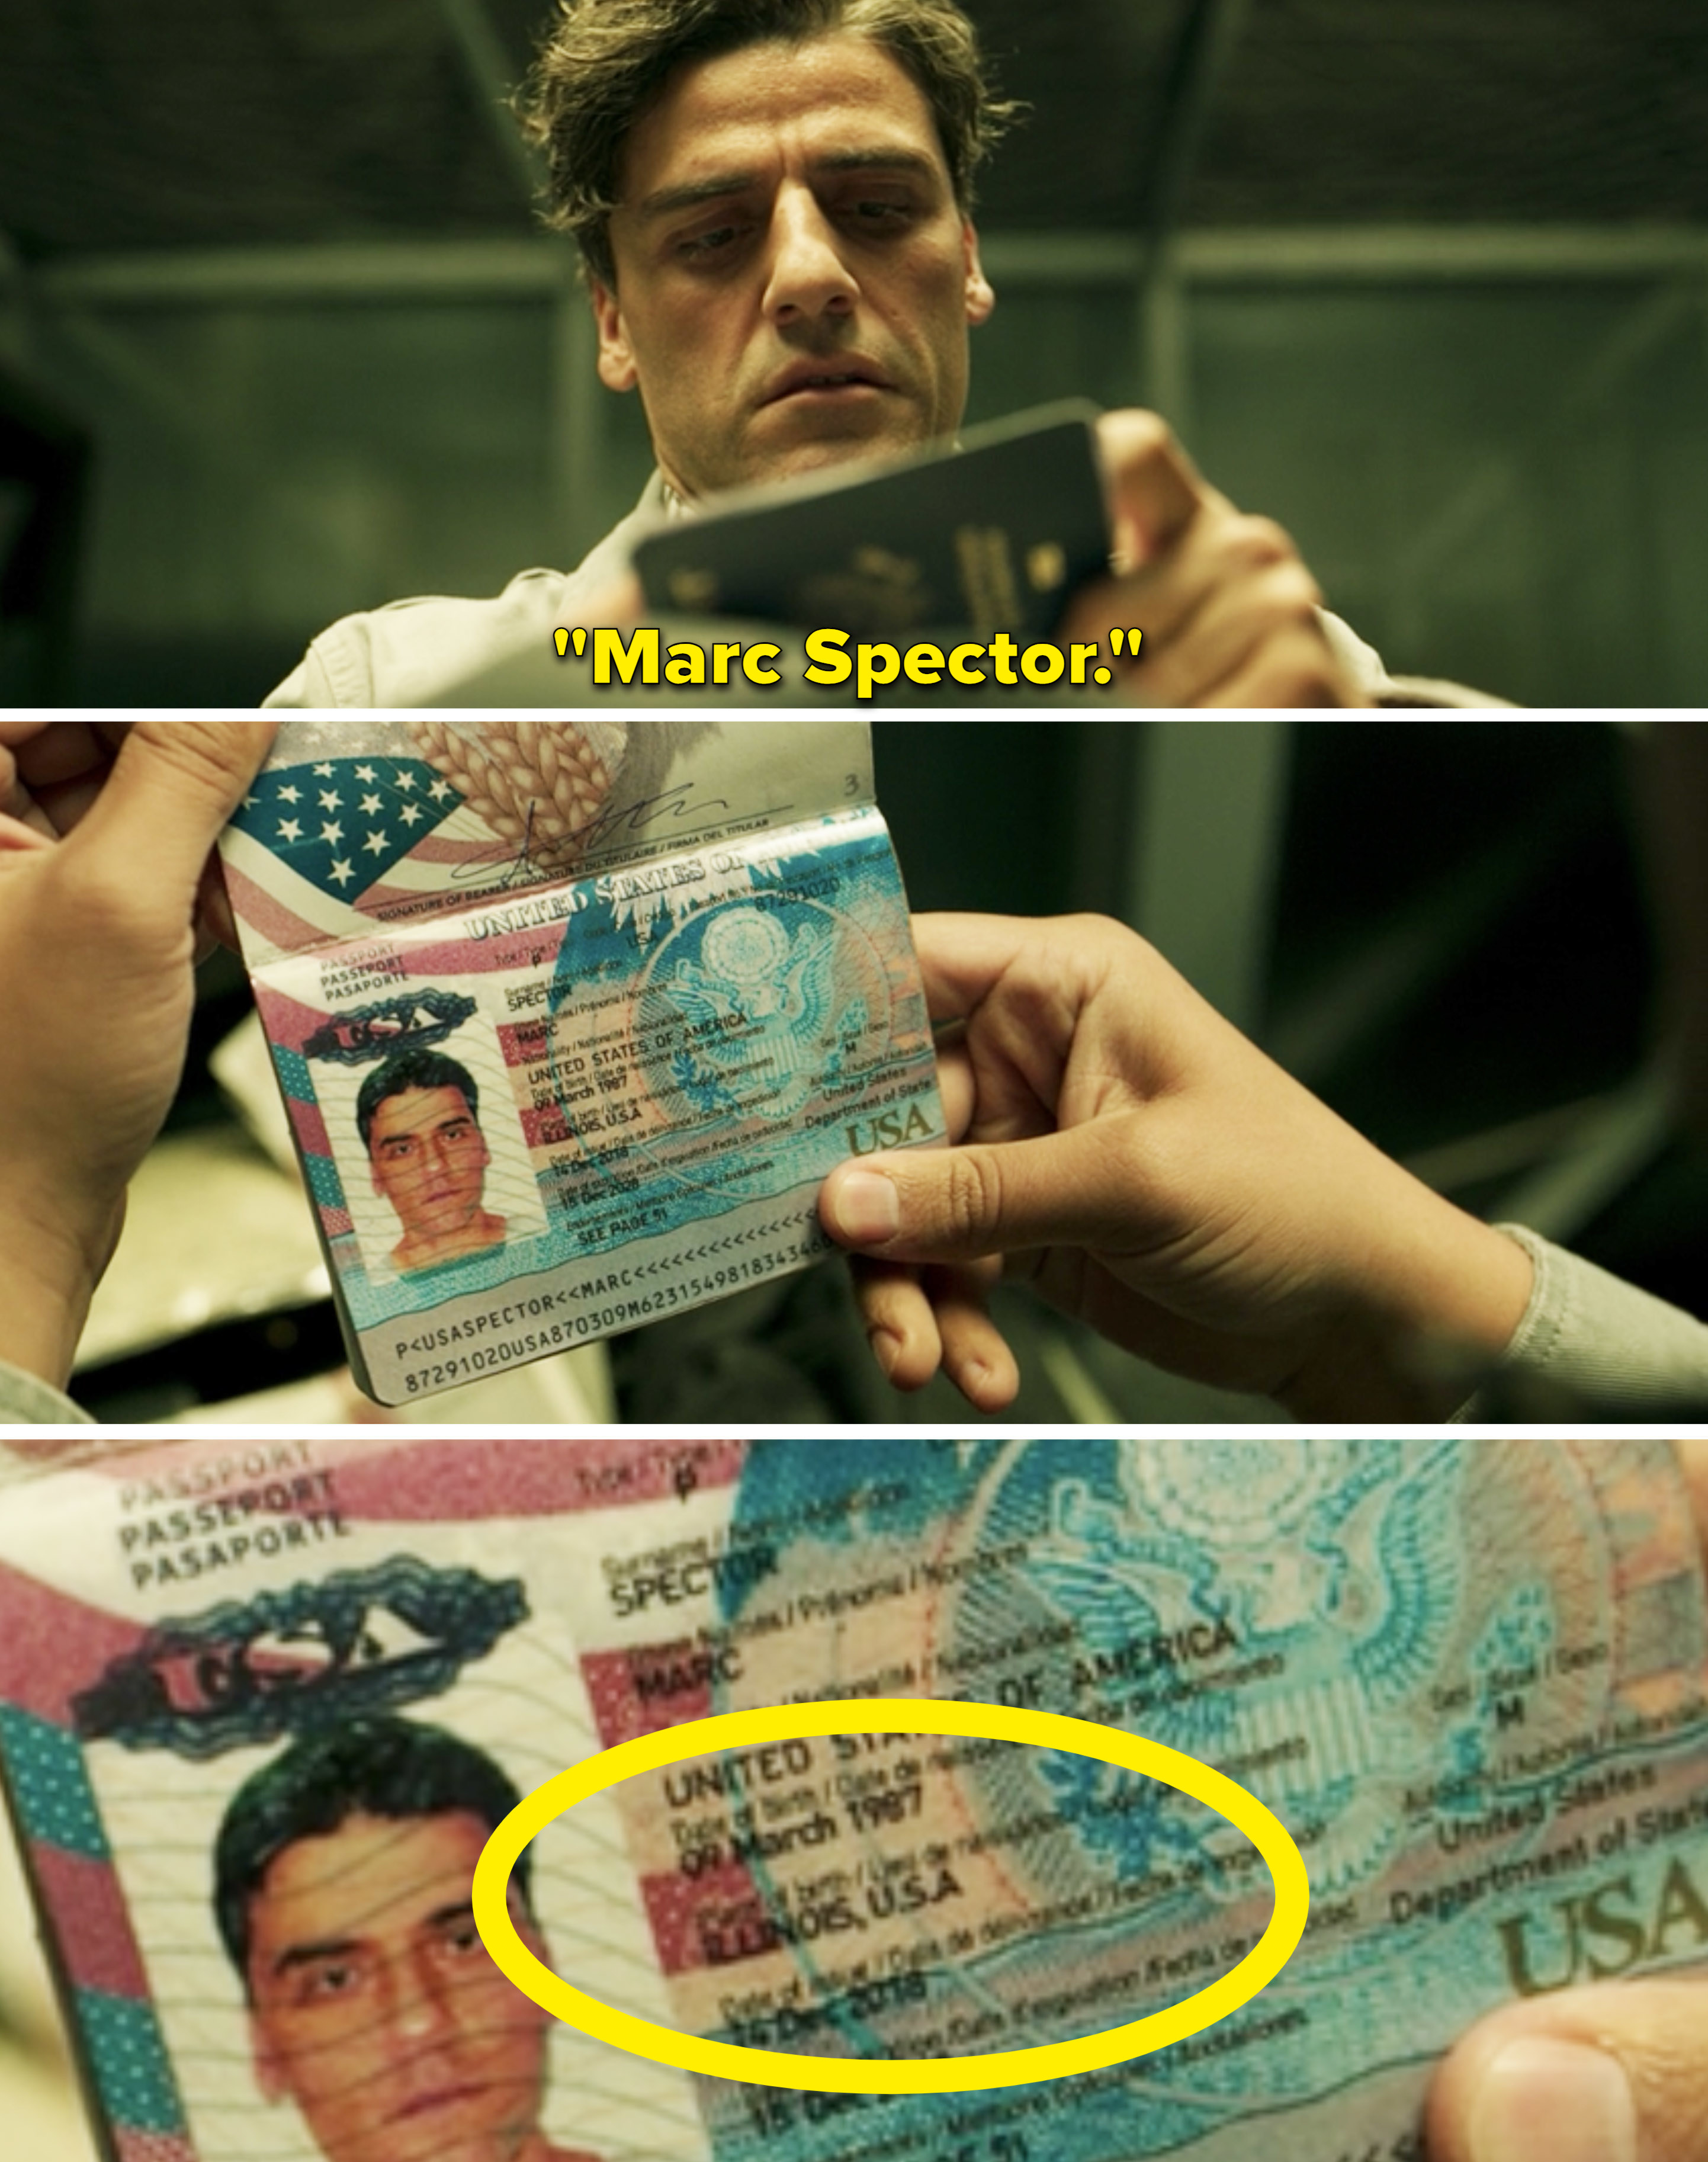 A closeup of Marc&#x27;s passport which shows that his place of birth is Illinois